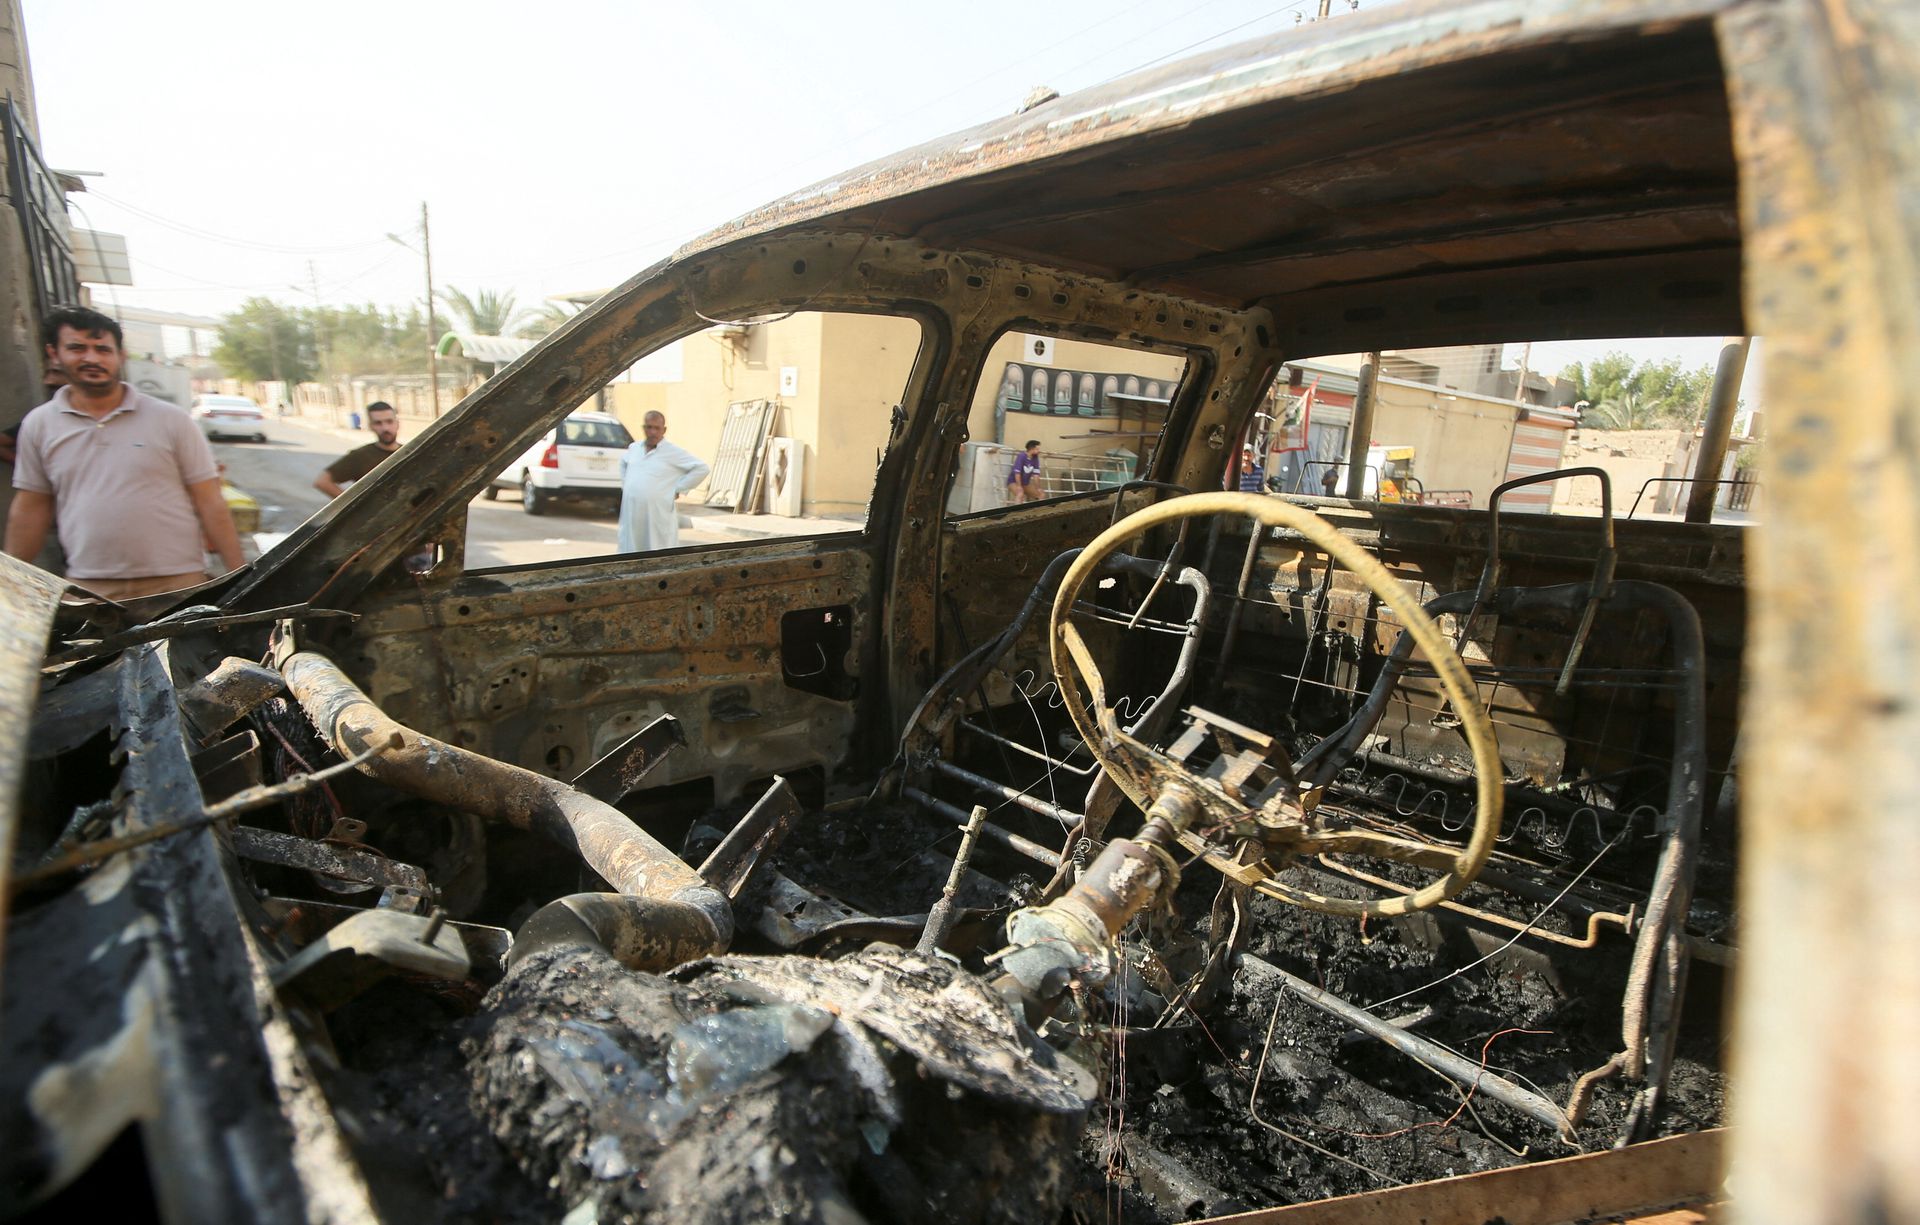 A burnt vehicle is pictured on a street aftermath of clashes among rival Shiite Muslim militants in Basra, Iraq Sept. 1, 2022. Photo: Essam al-Sudani/Reuters